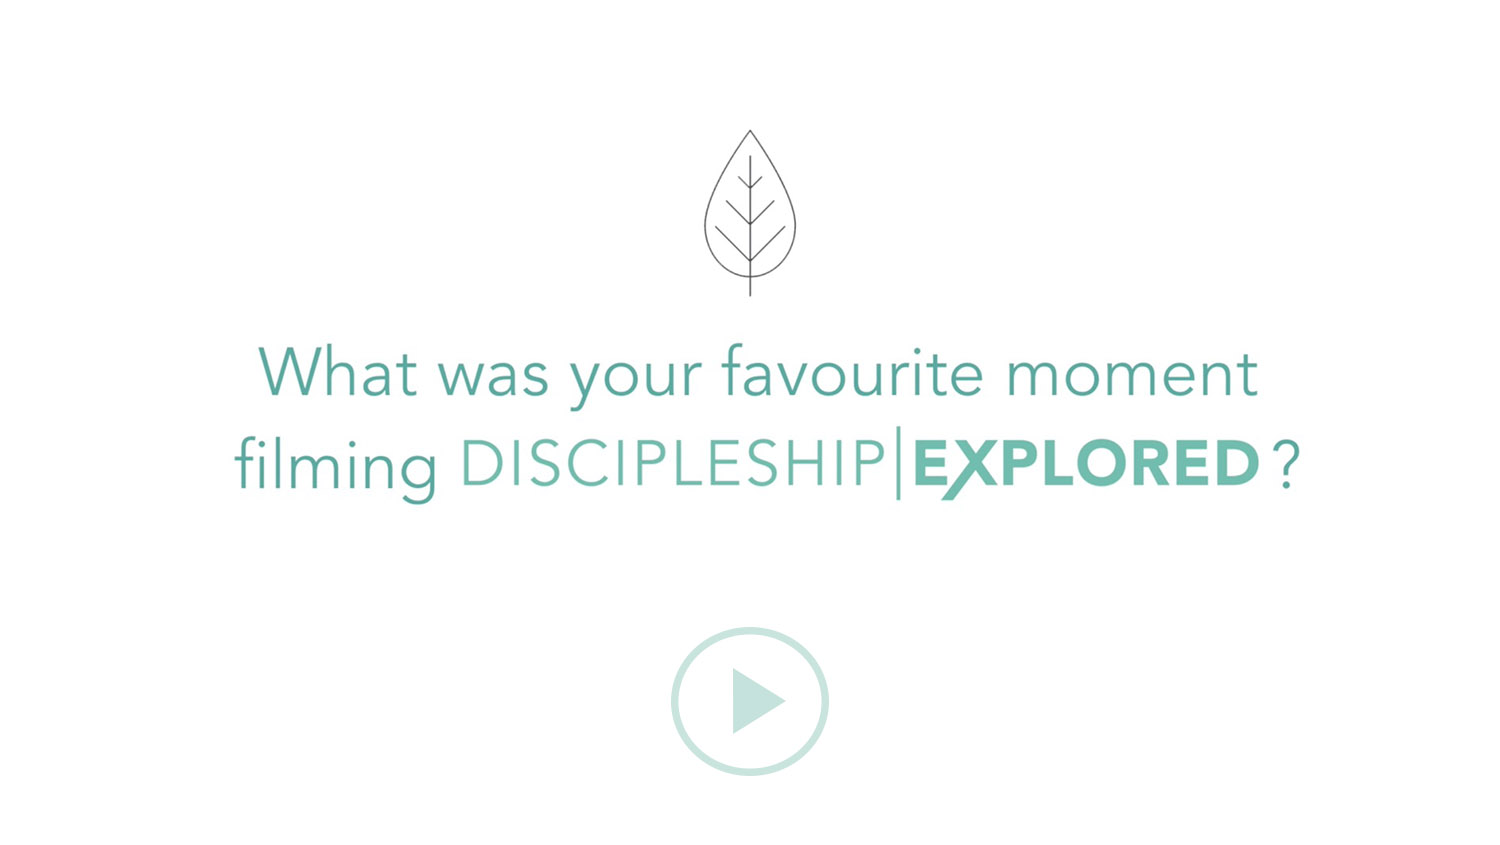 Question 8*What was your favourite moment filming Discipleship Explored?